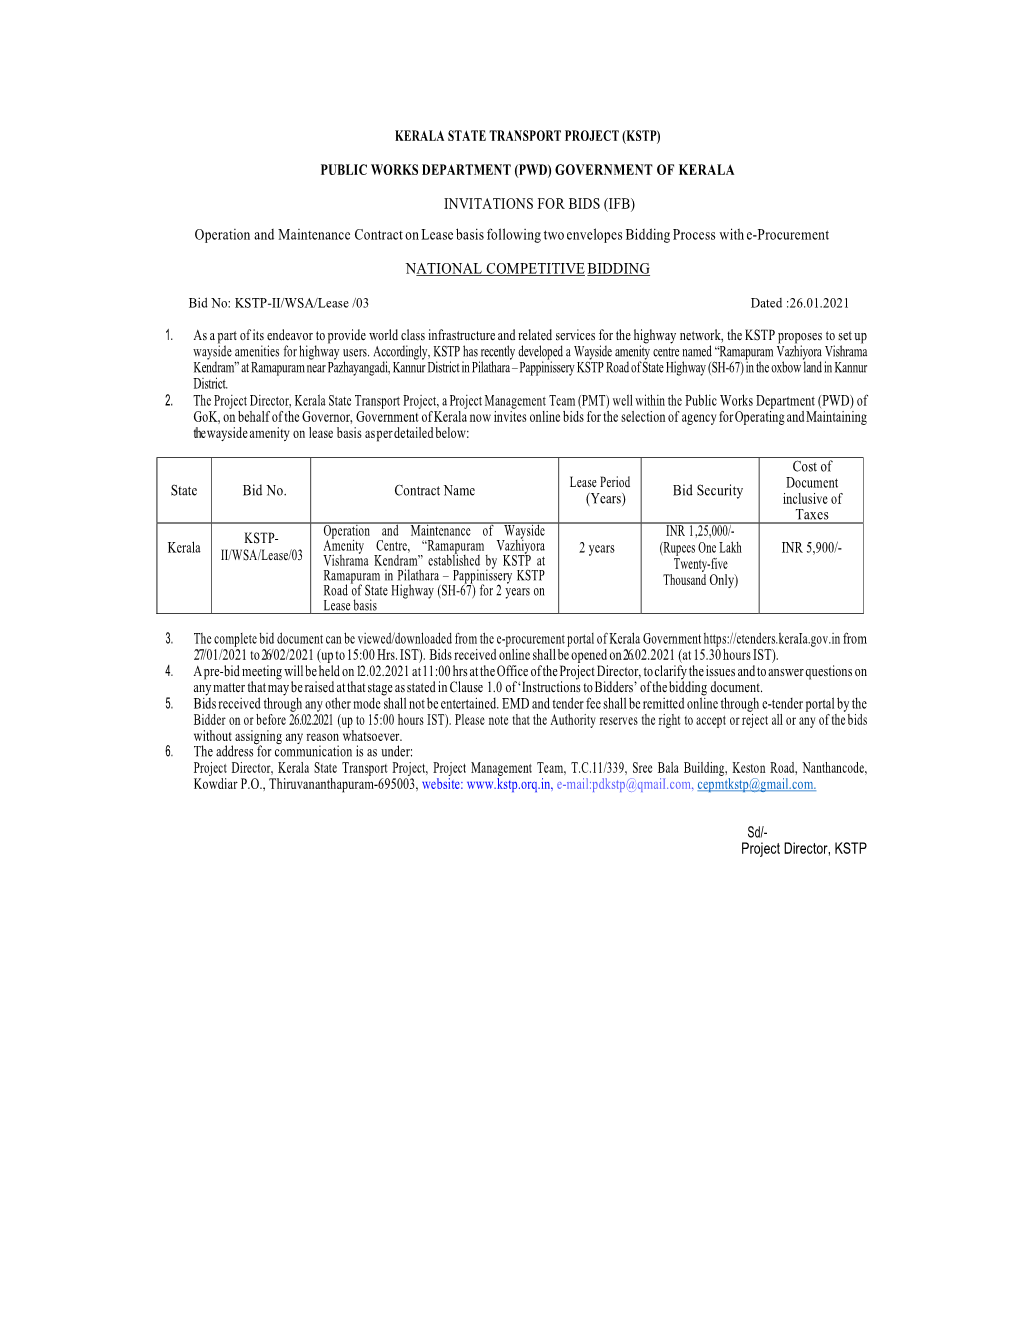 Pwd) Government of Kerala Invitations for Bids (Ifb